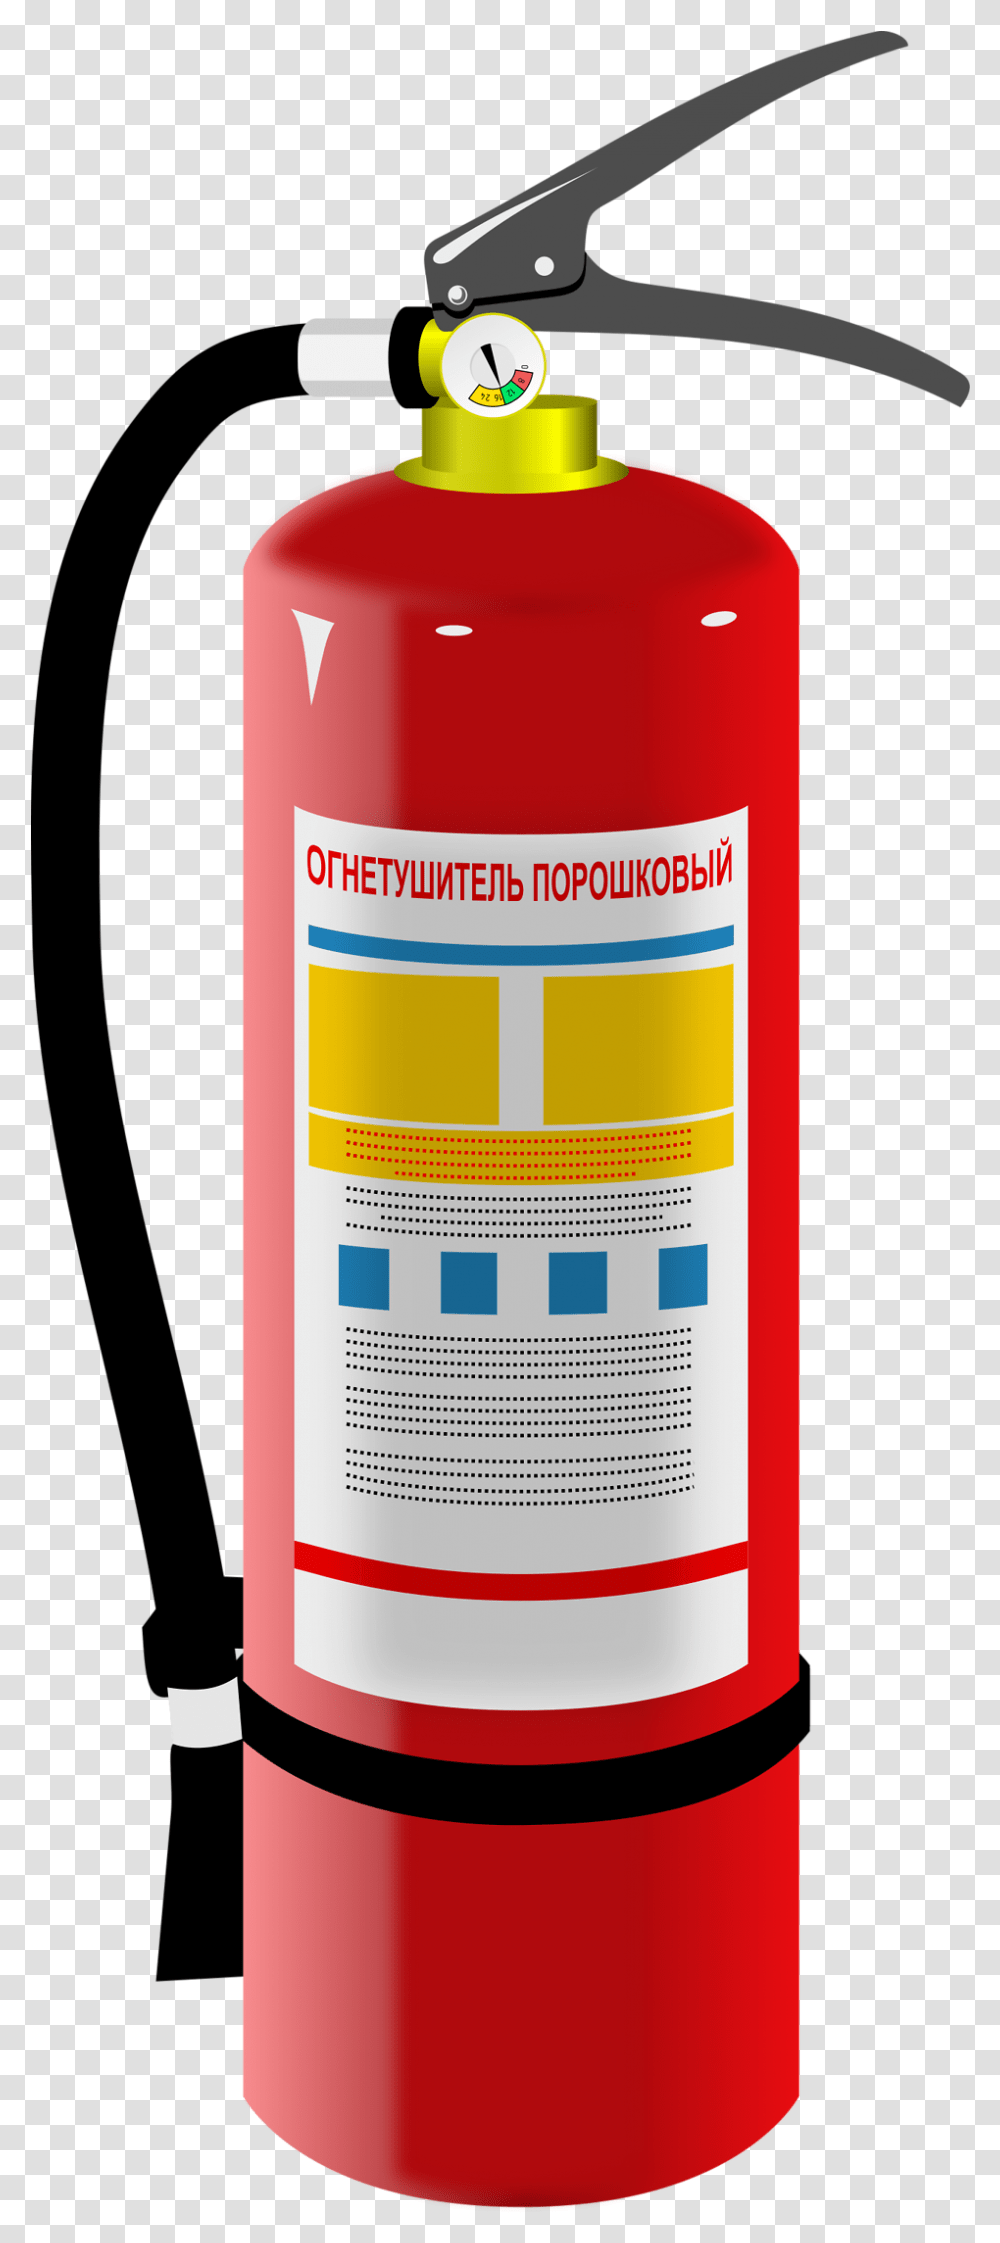 Fire Extinguisher Clipart Clip Art Fire Extinguisher, Can, Aluminium, Bottle, Spray Can Transparent Png